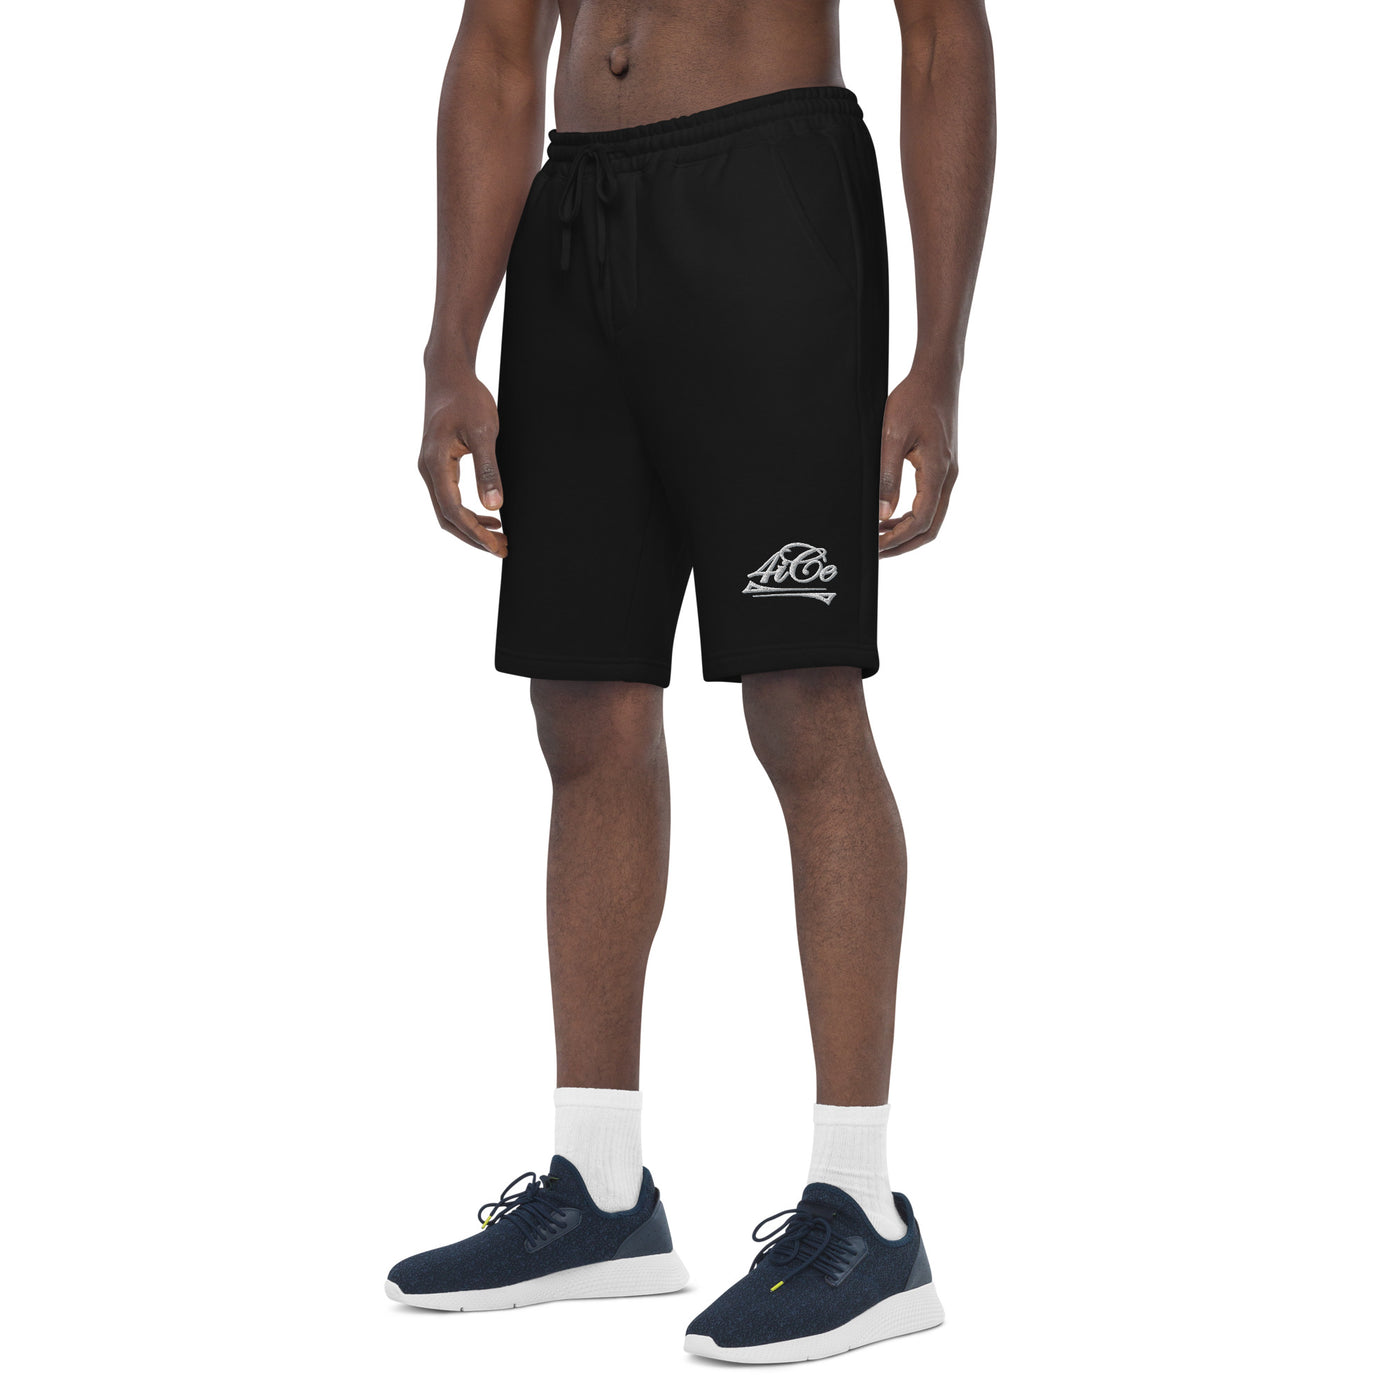  4iCe® Elite Boxing black embroidered shorts, front-left view